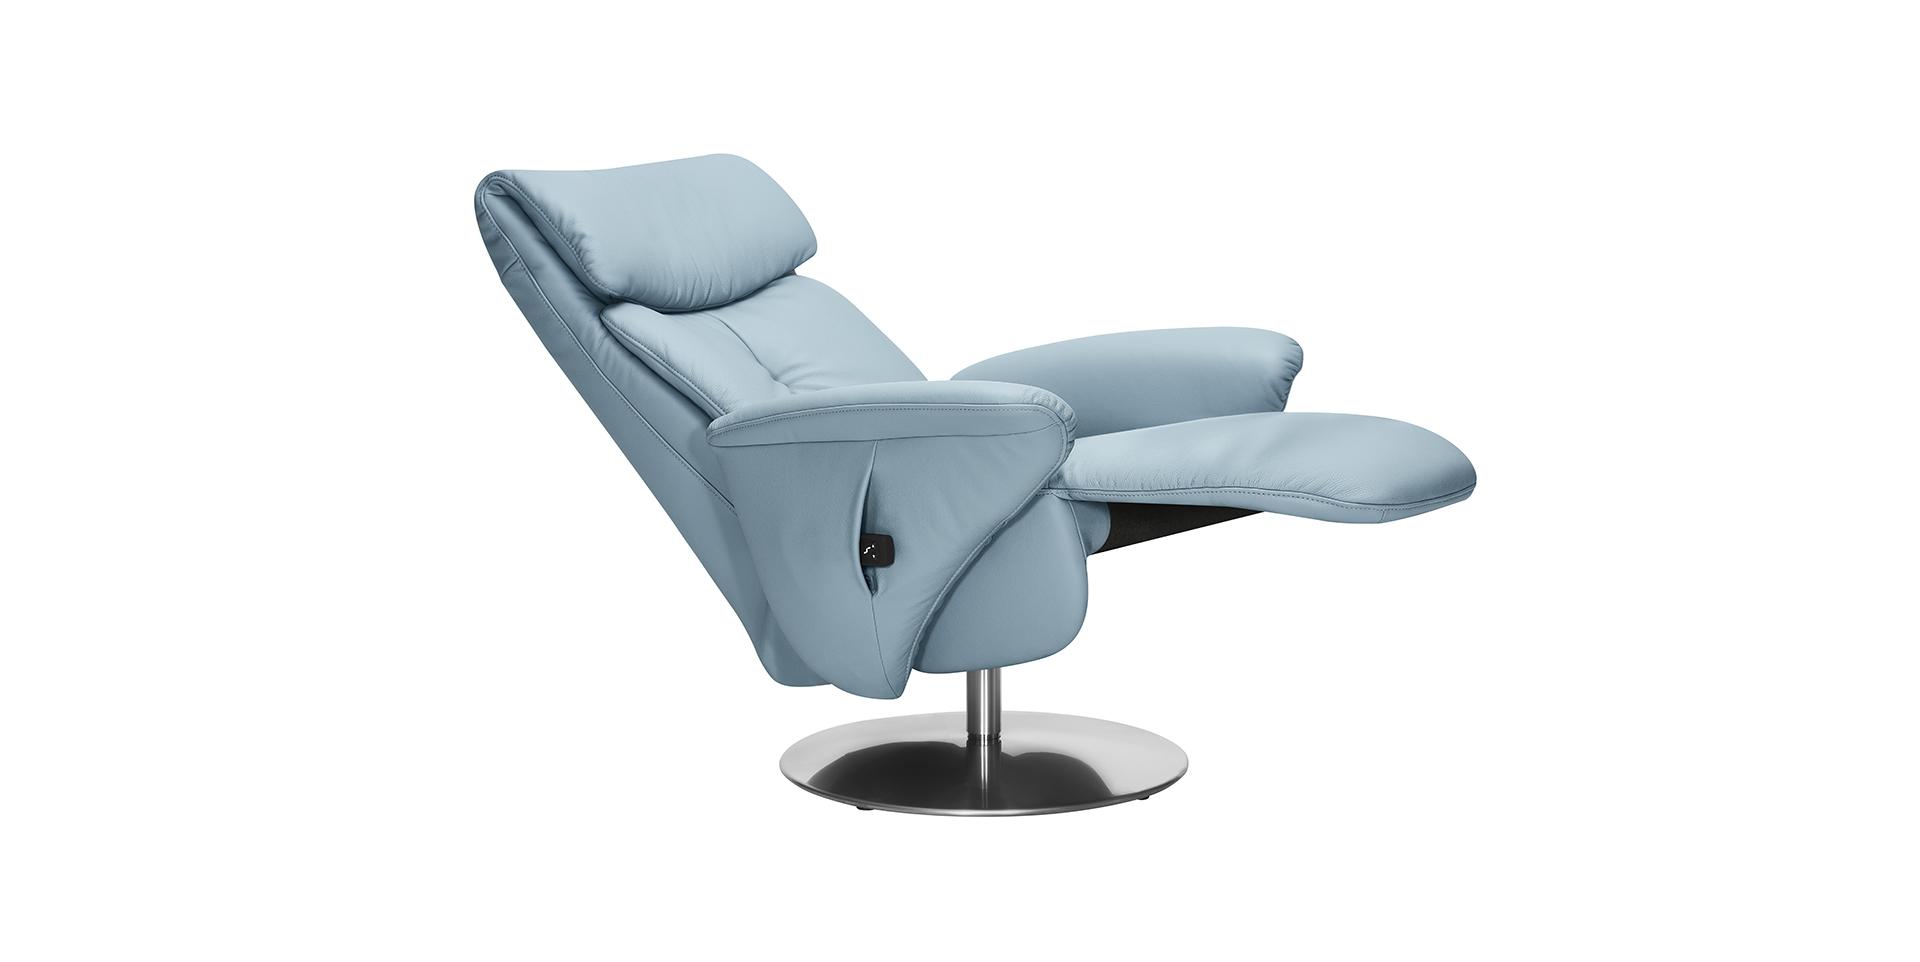 Slider Fauteuil relaxation 7341 (image 5)